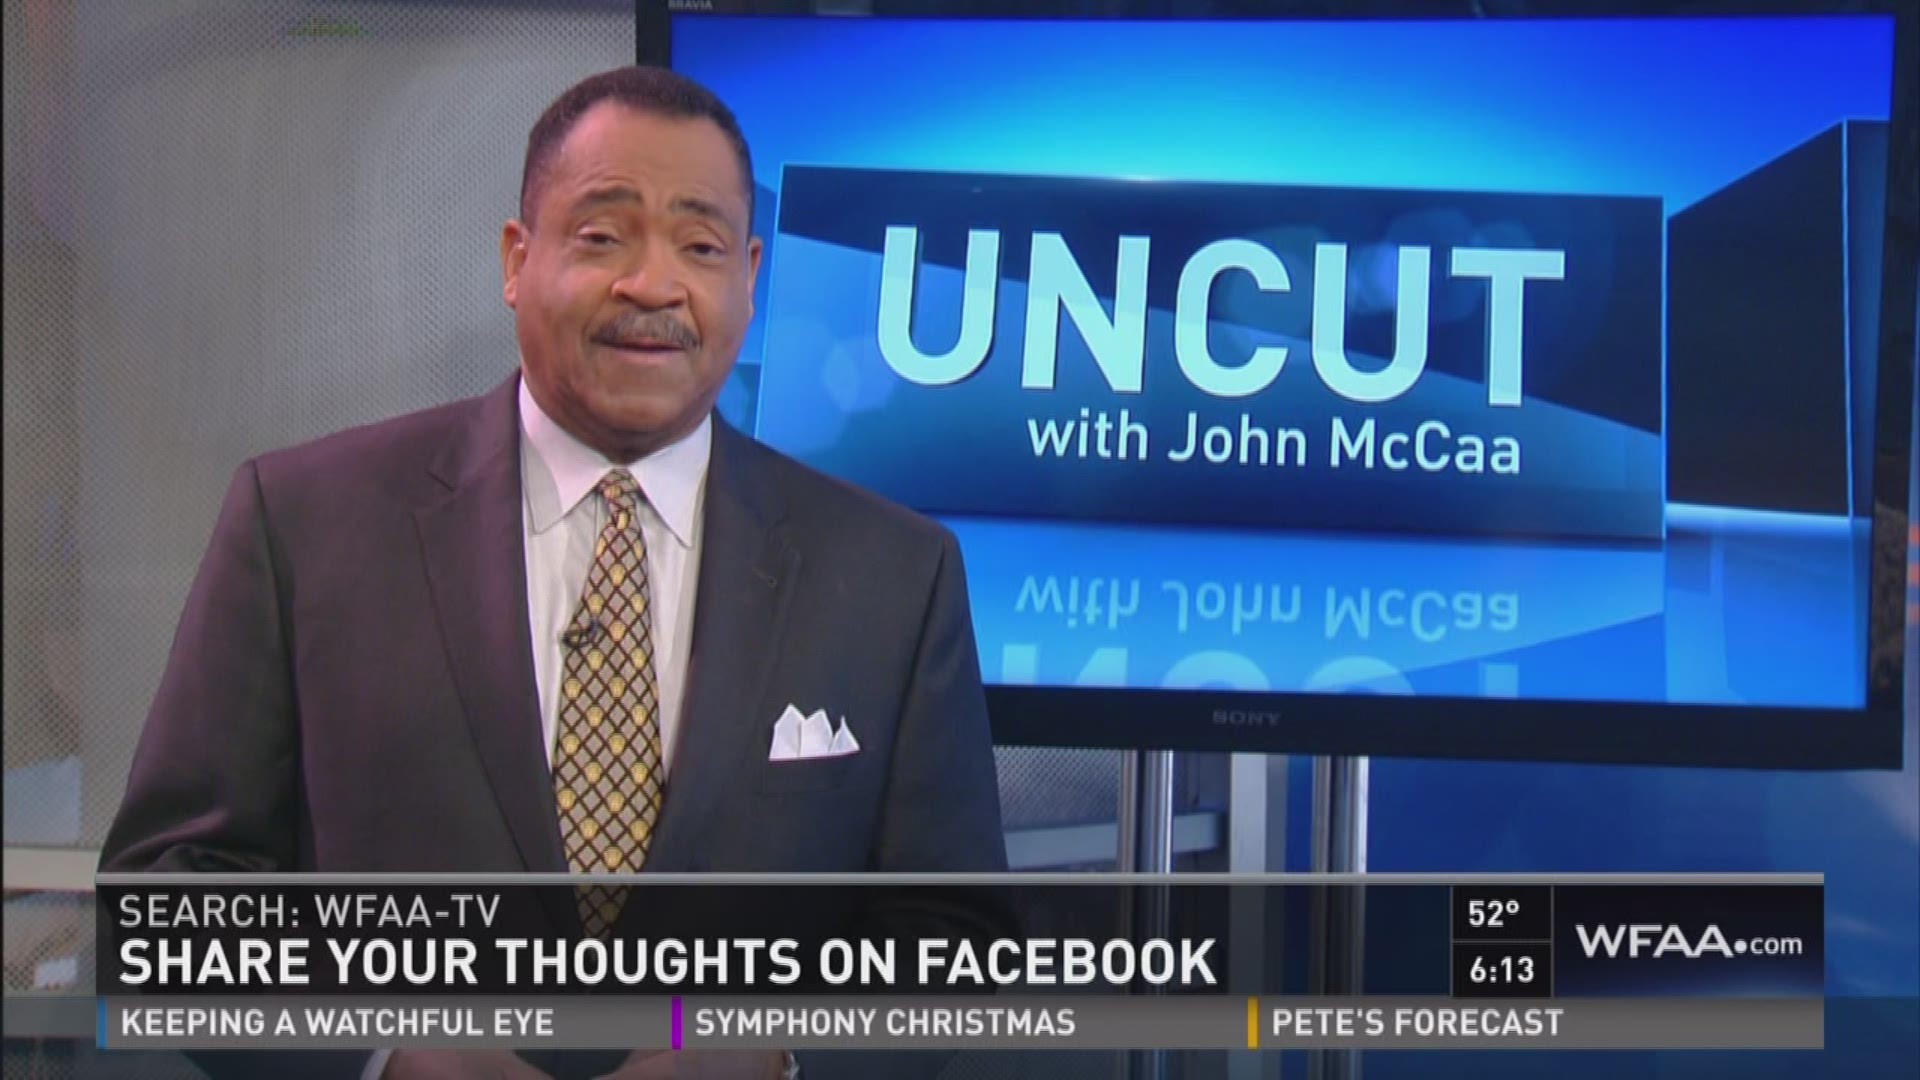 News 8's John McCaa shares his thoughts on the week's big stories in his Uncut commentaries.